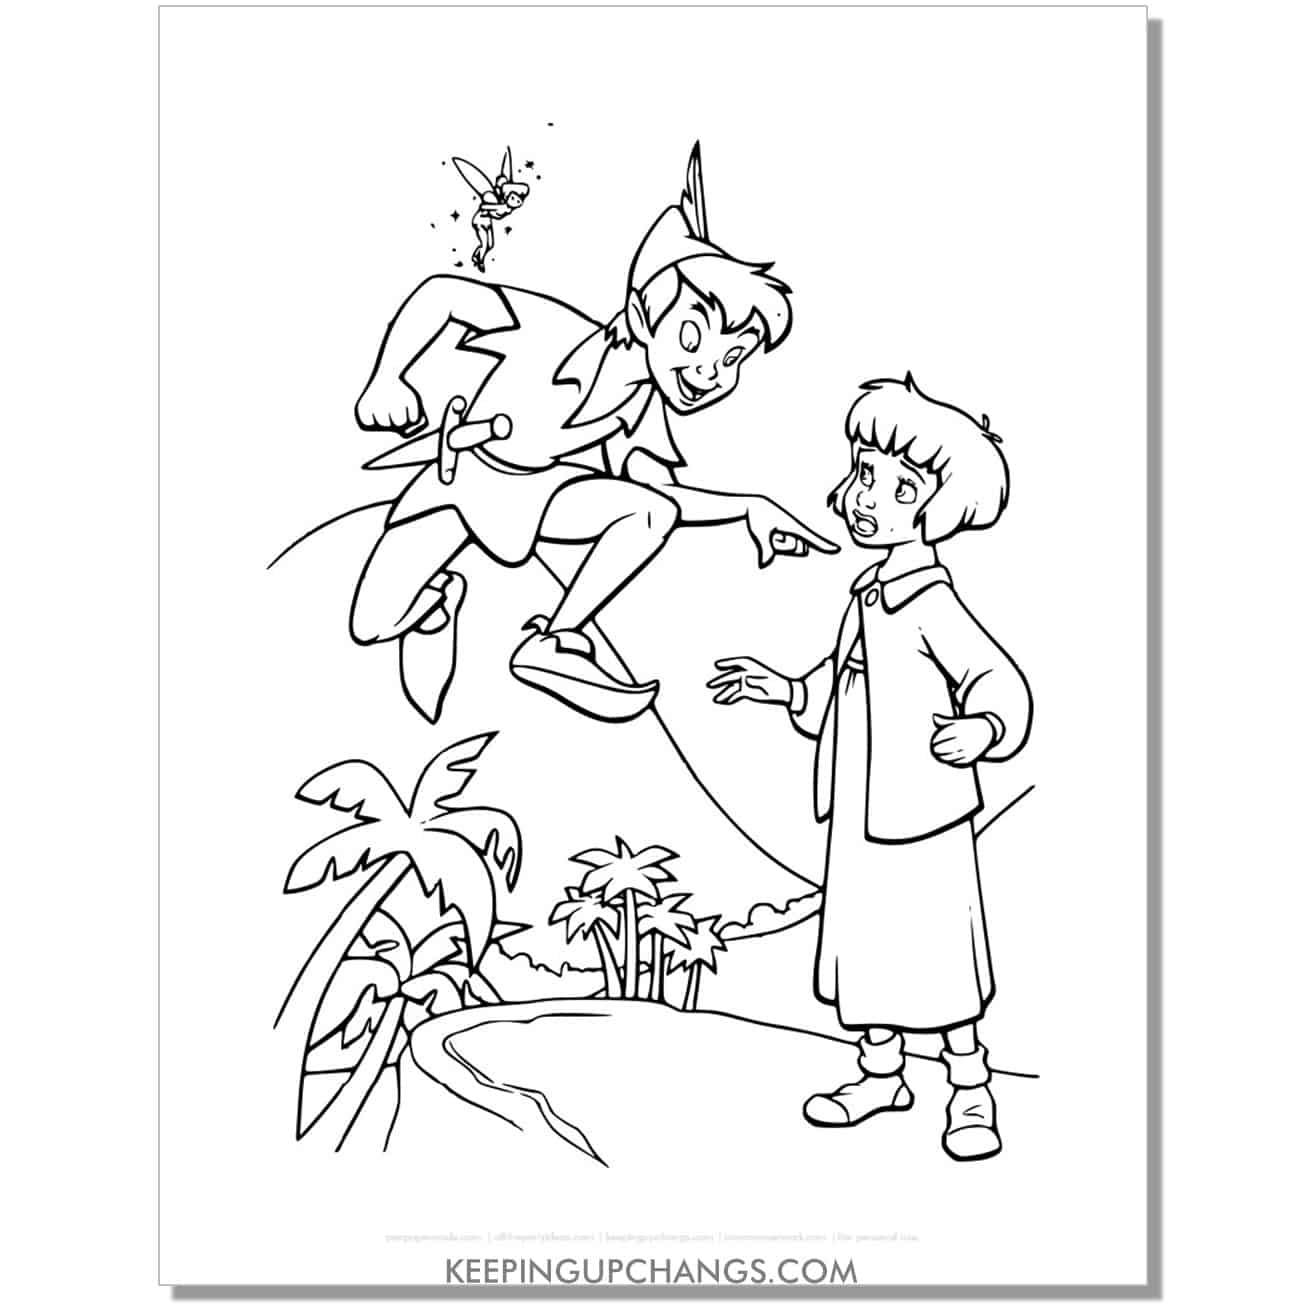 peter pan and tinkerbell with jane darling coloring page, sheet.